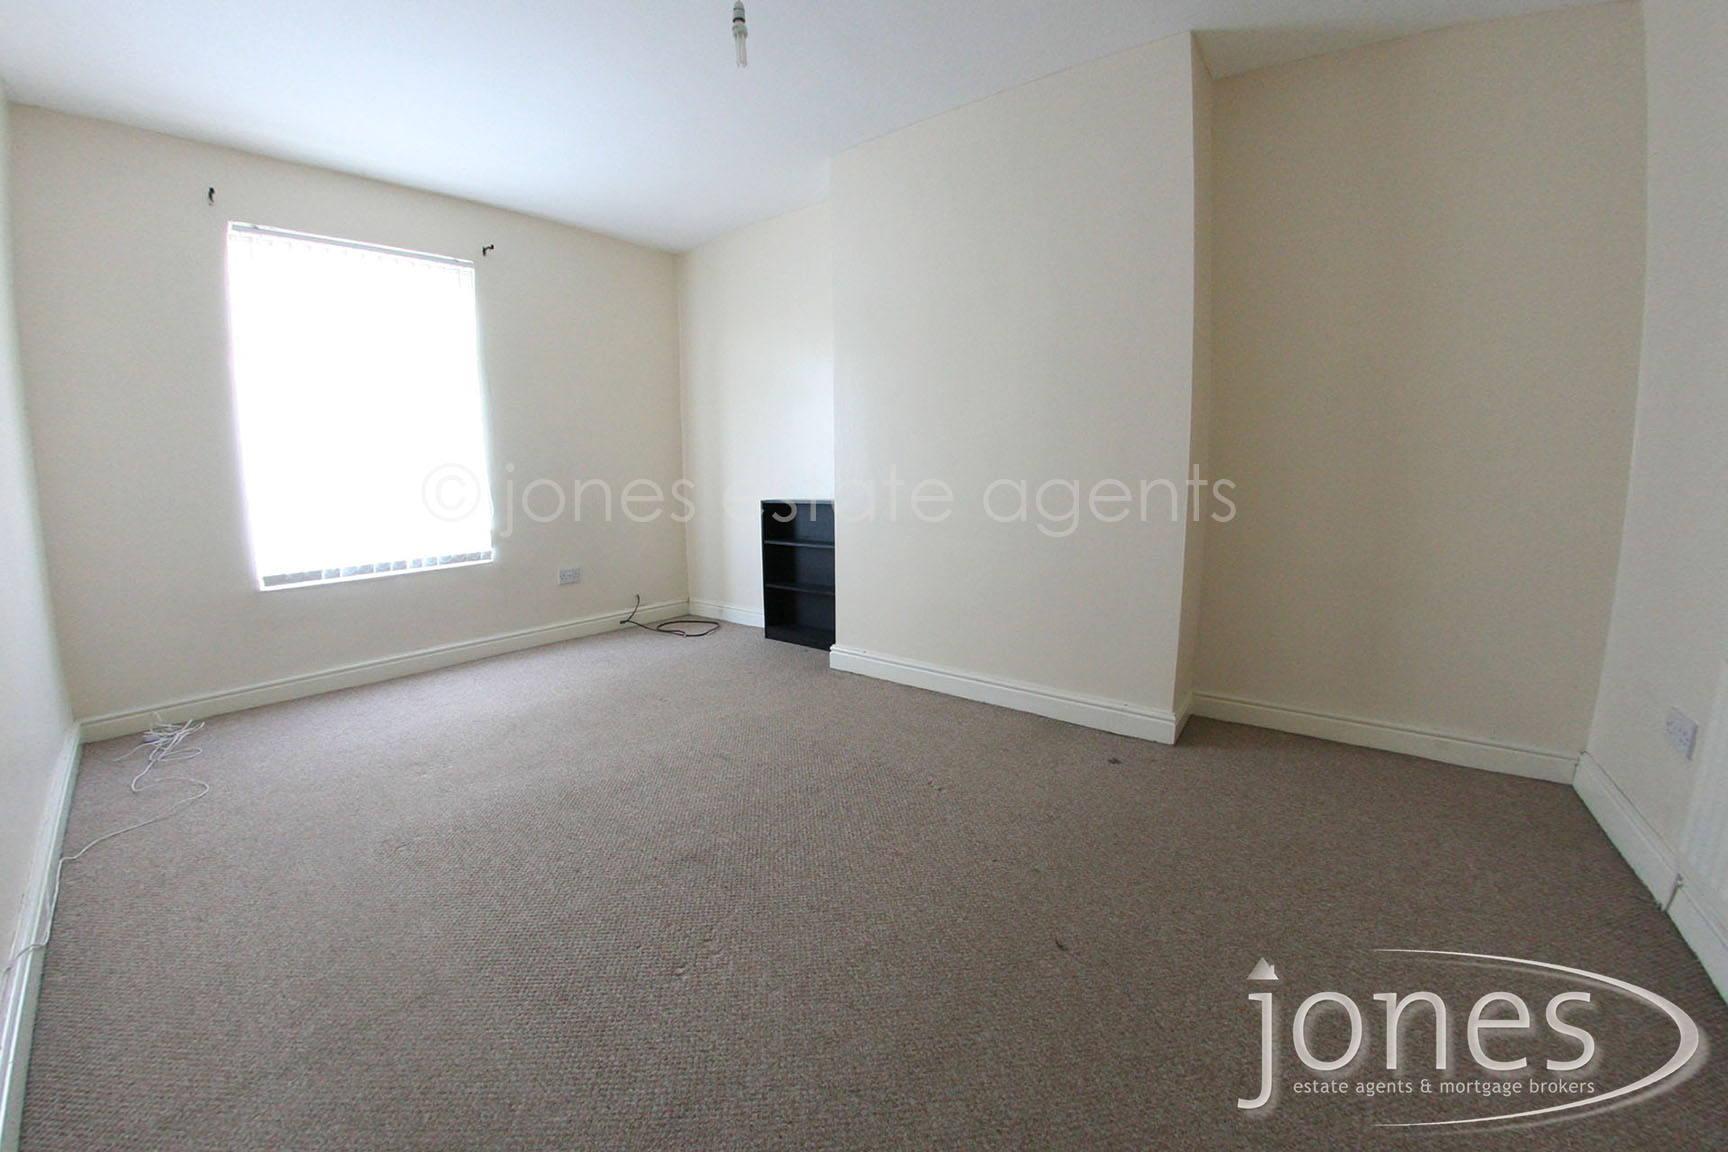 Home for Sale Let - Photo 05 North Road West, Wingate, TS28 5AP